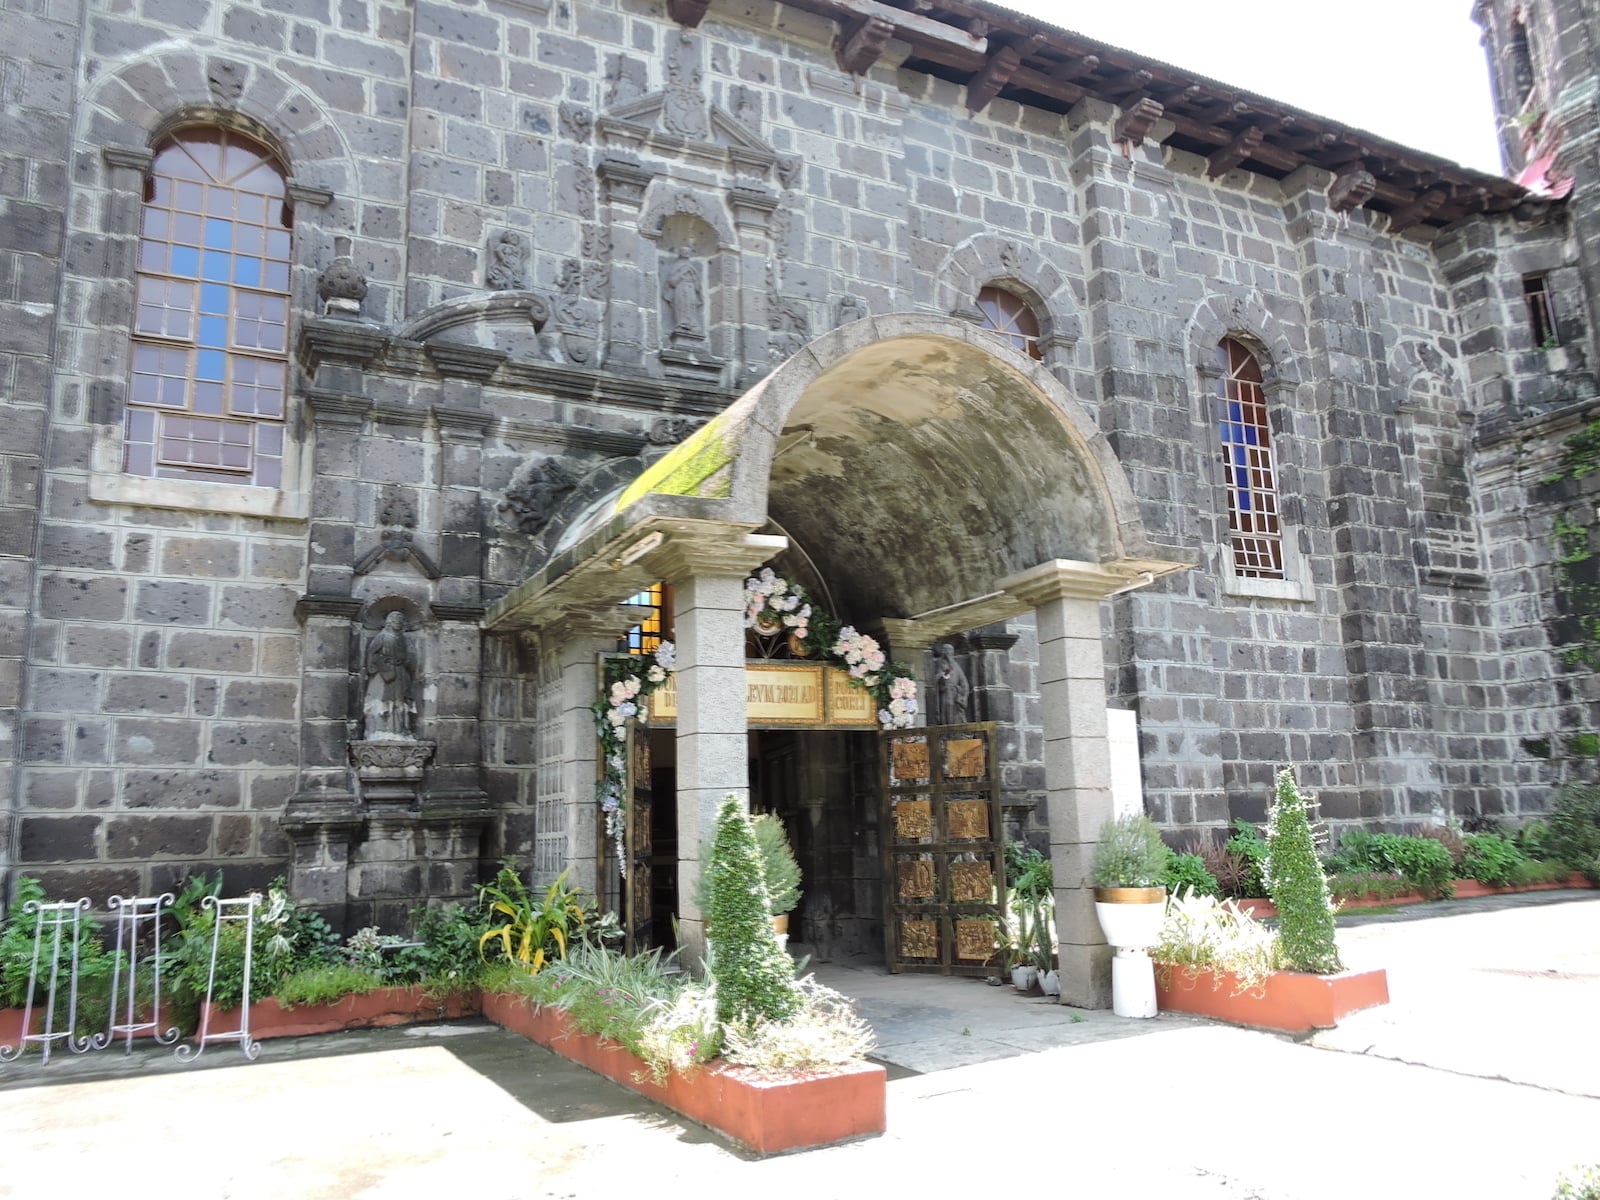 The Church of San Ildefonso or the Tanay Church in Tanay, Rizal Philippines